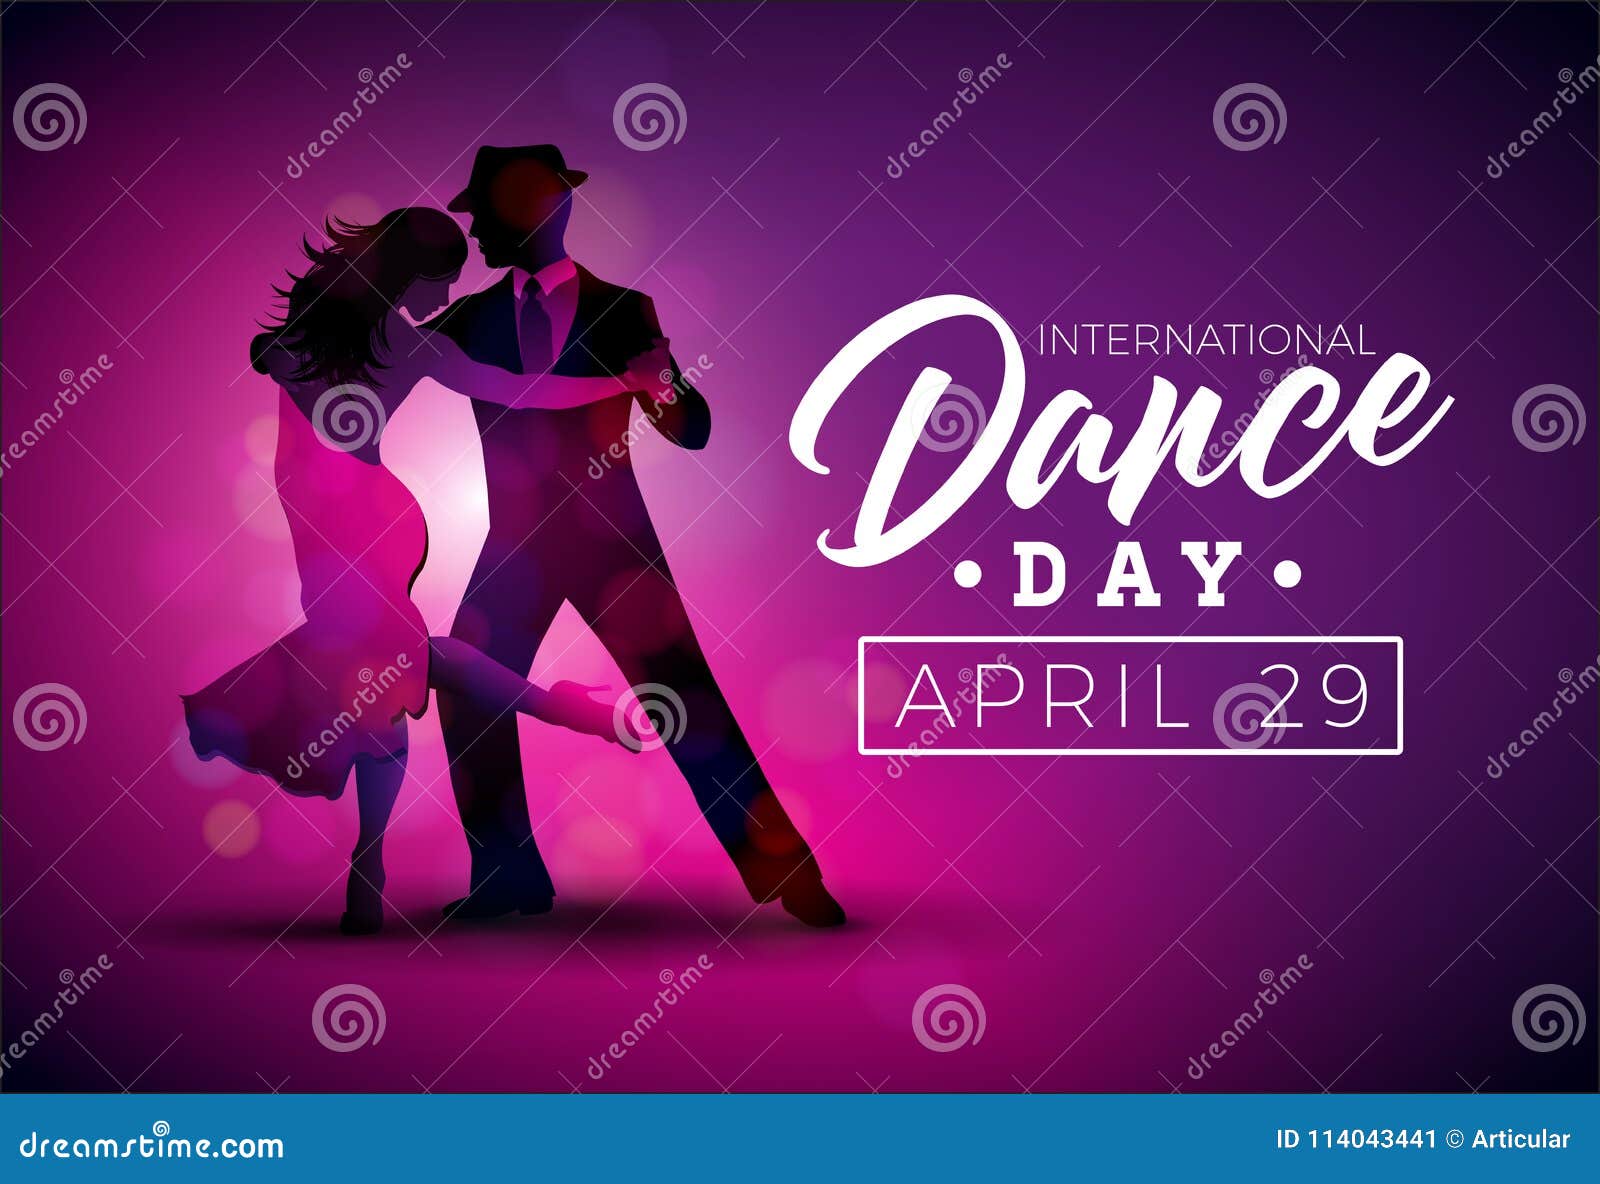 International Dance Day Vector Illustration with Tango Dancing Couple on  Purple Background. Design Template for Banner Stock Vector - Illustration  of background, badge: 114043441